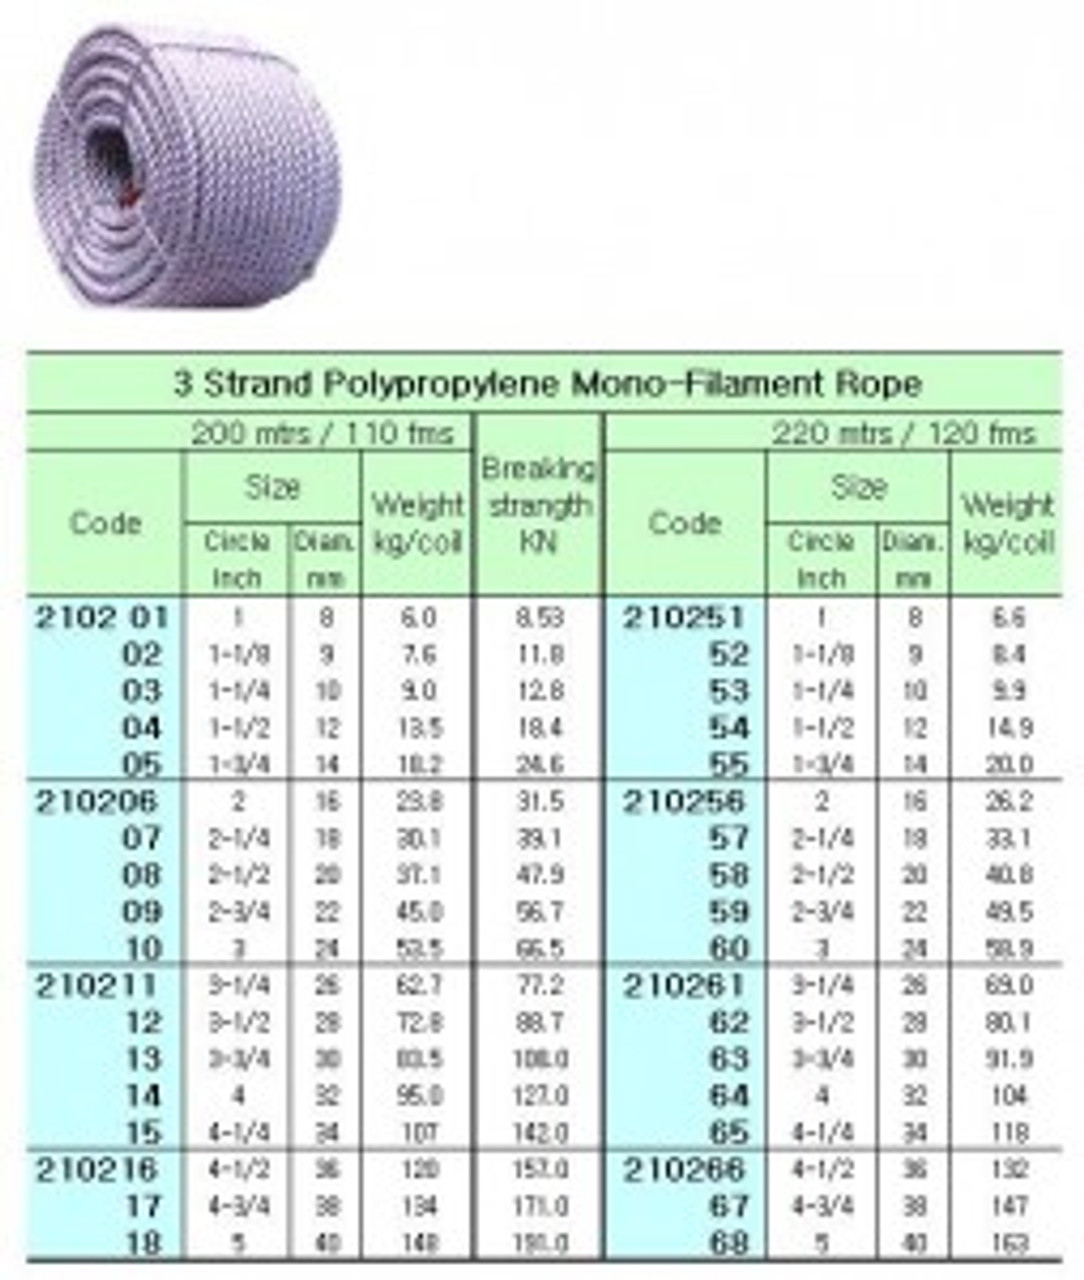 IMPA 210260 POLYPROPYLENE ROPE 24mm 3-strand coil of 220 mtr.